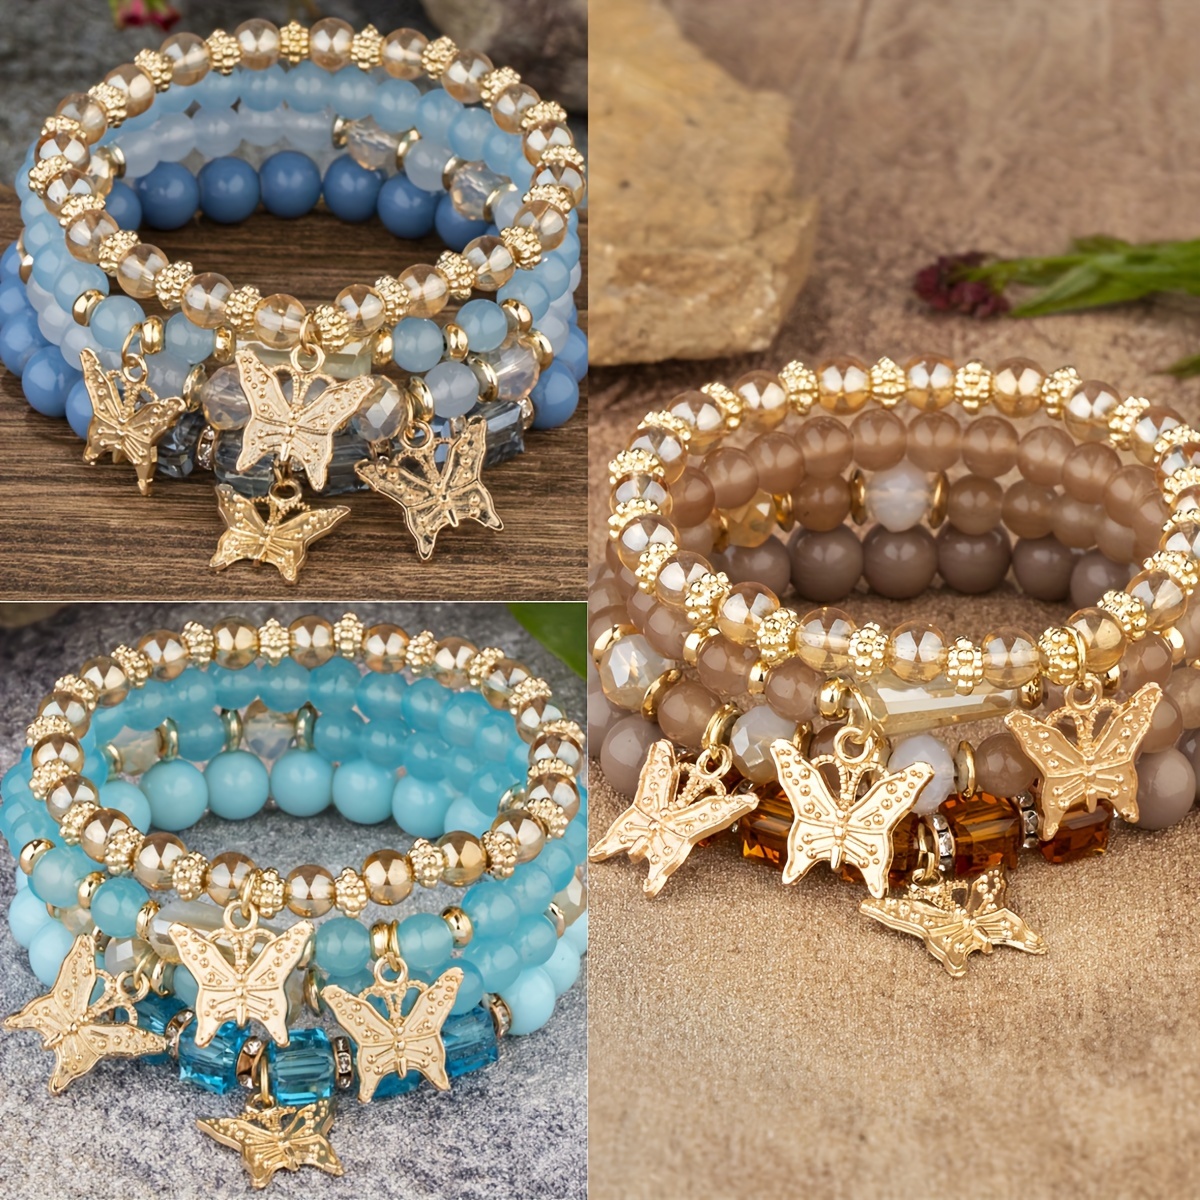 

12pcs Bohemian Multilayer Beaded Bracelet With Butterfly Crystal Pendants - Stretch And Stackable Multi-piece Hand String, Unisex Summer Beach Hand Jewelry Gifts